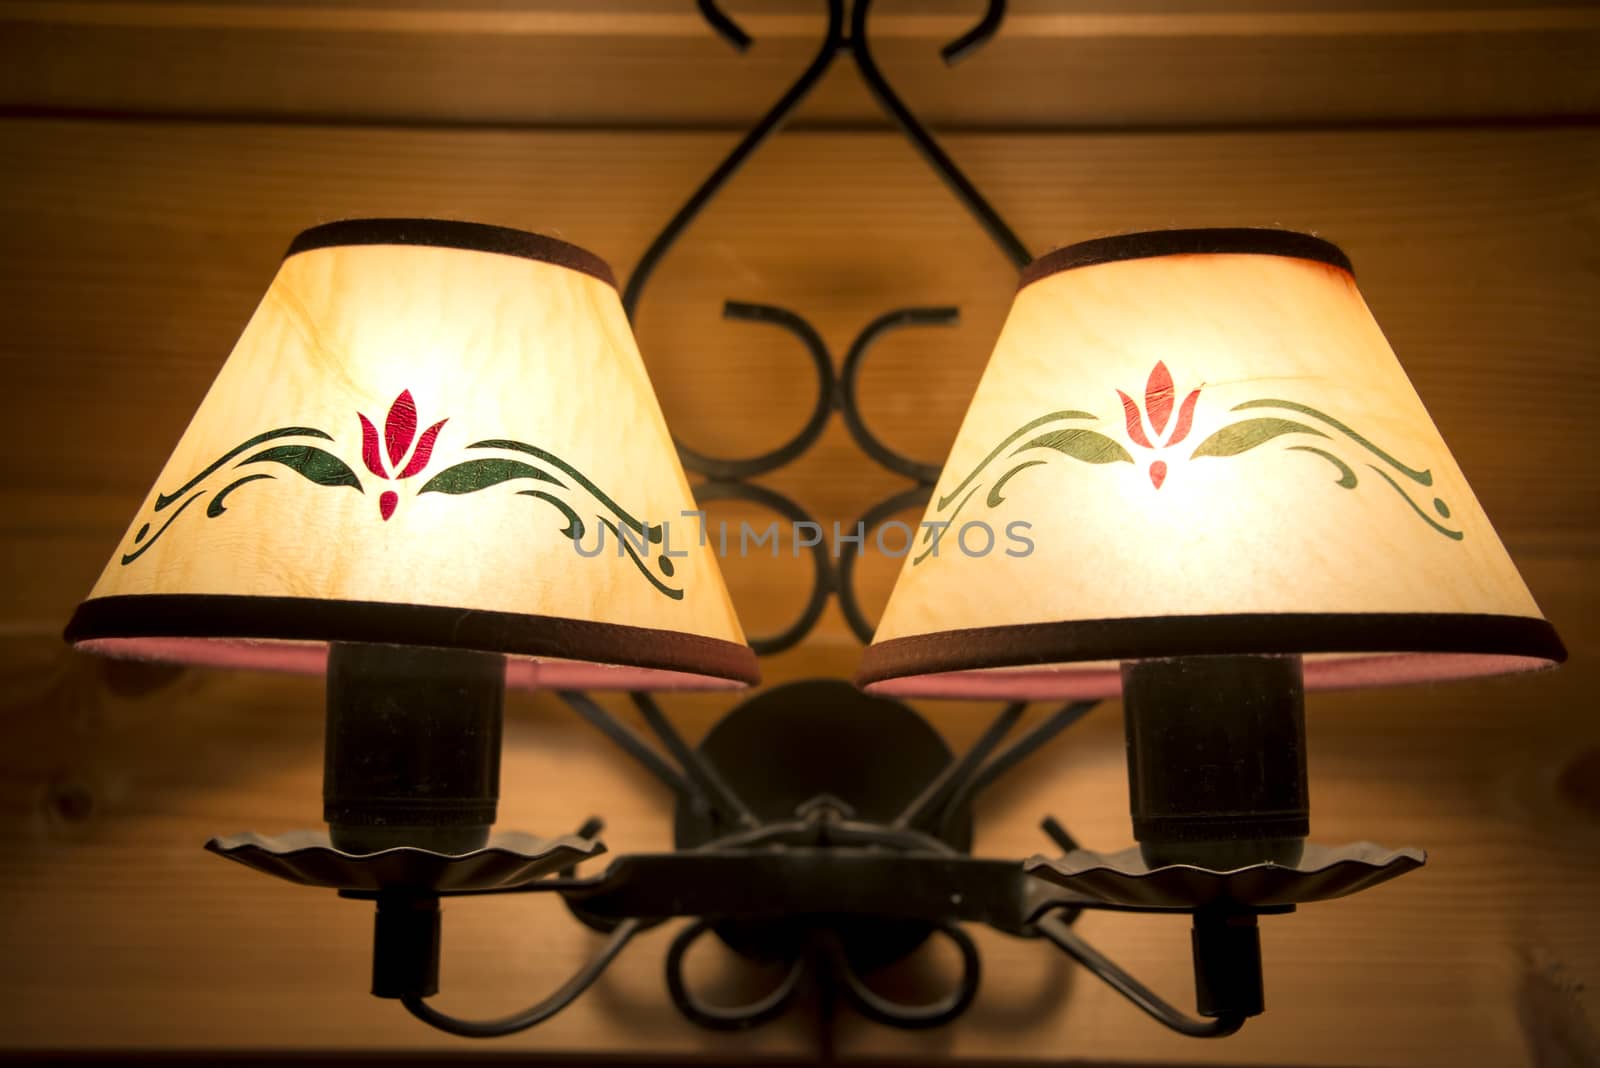 Traditional wrought iron lamps